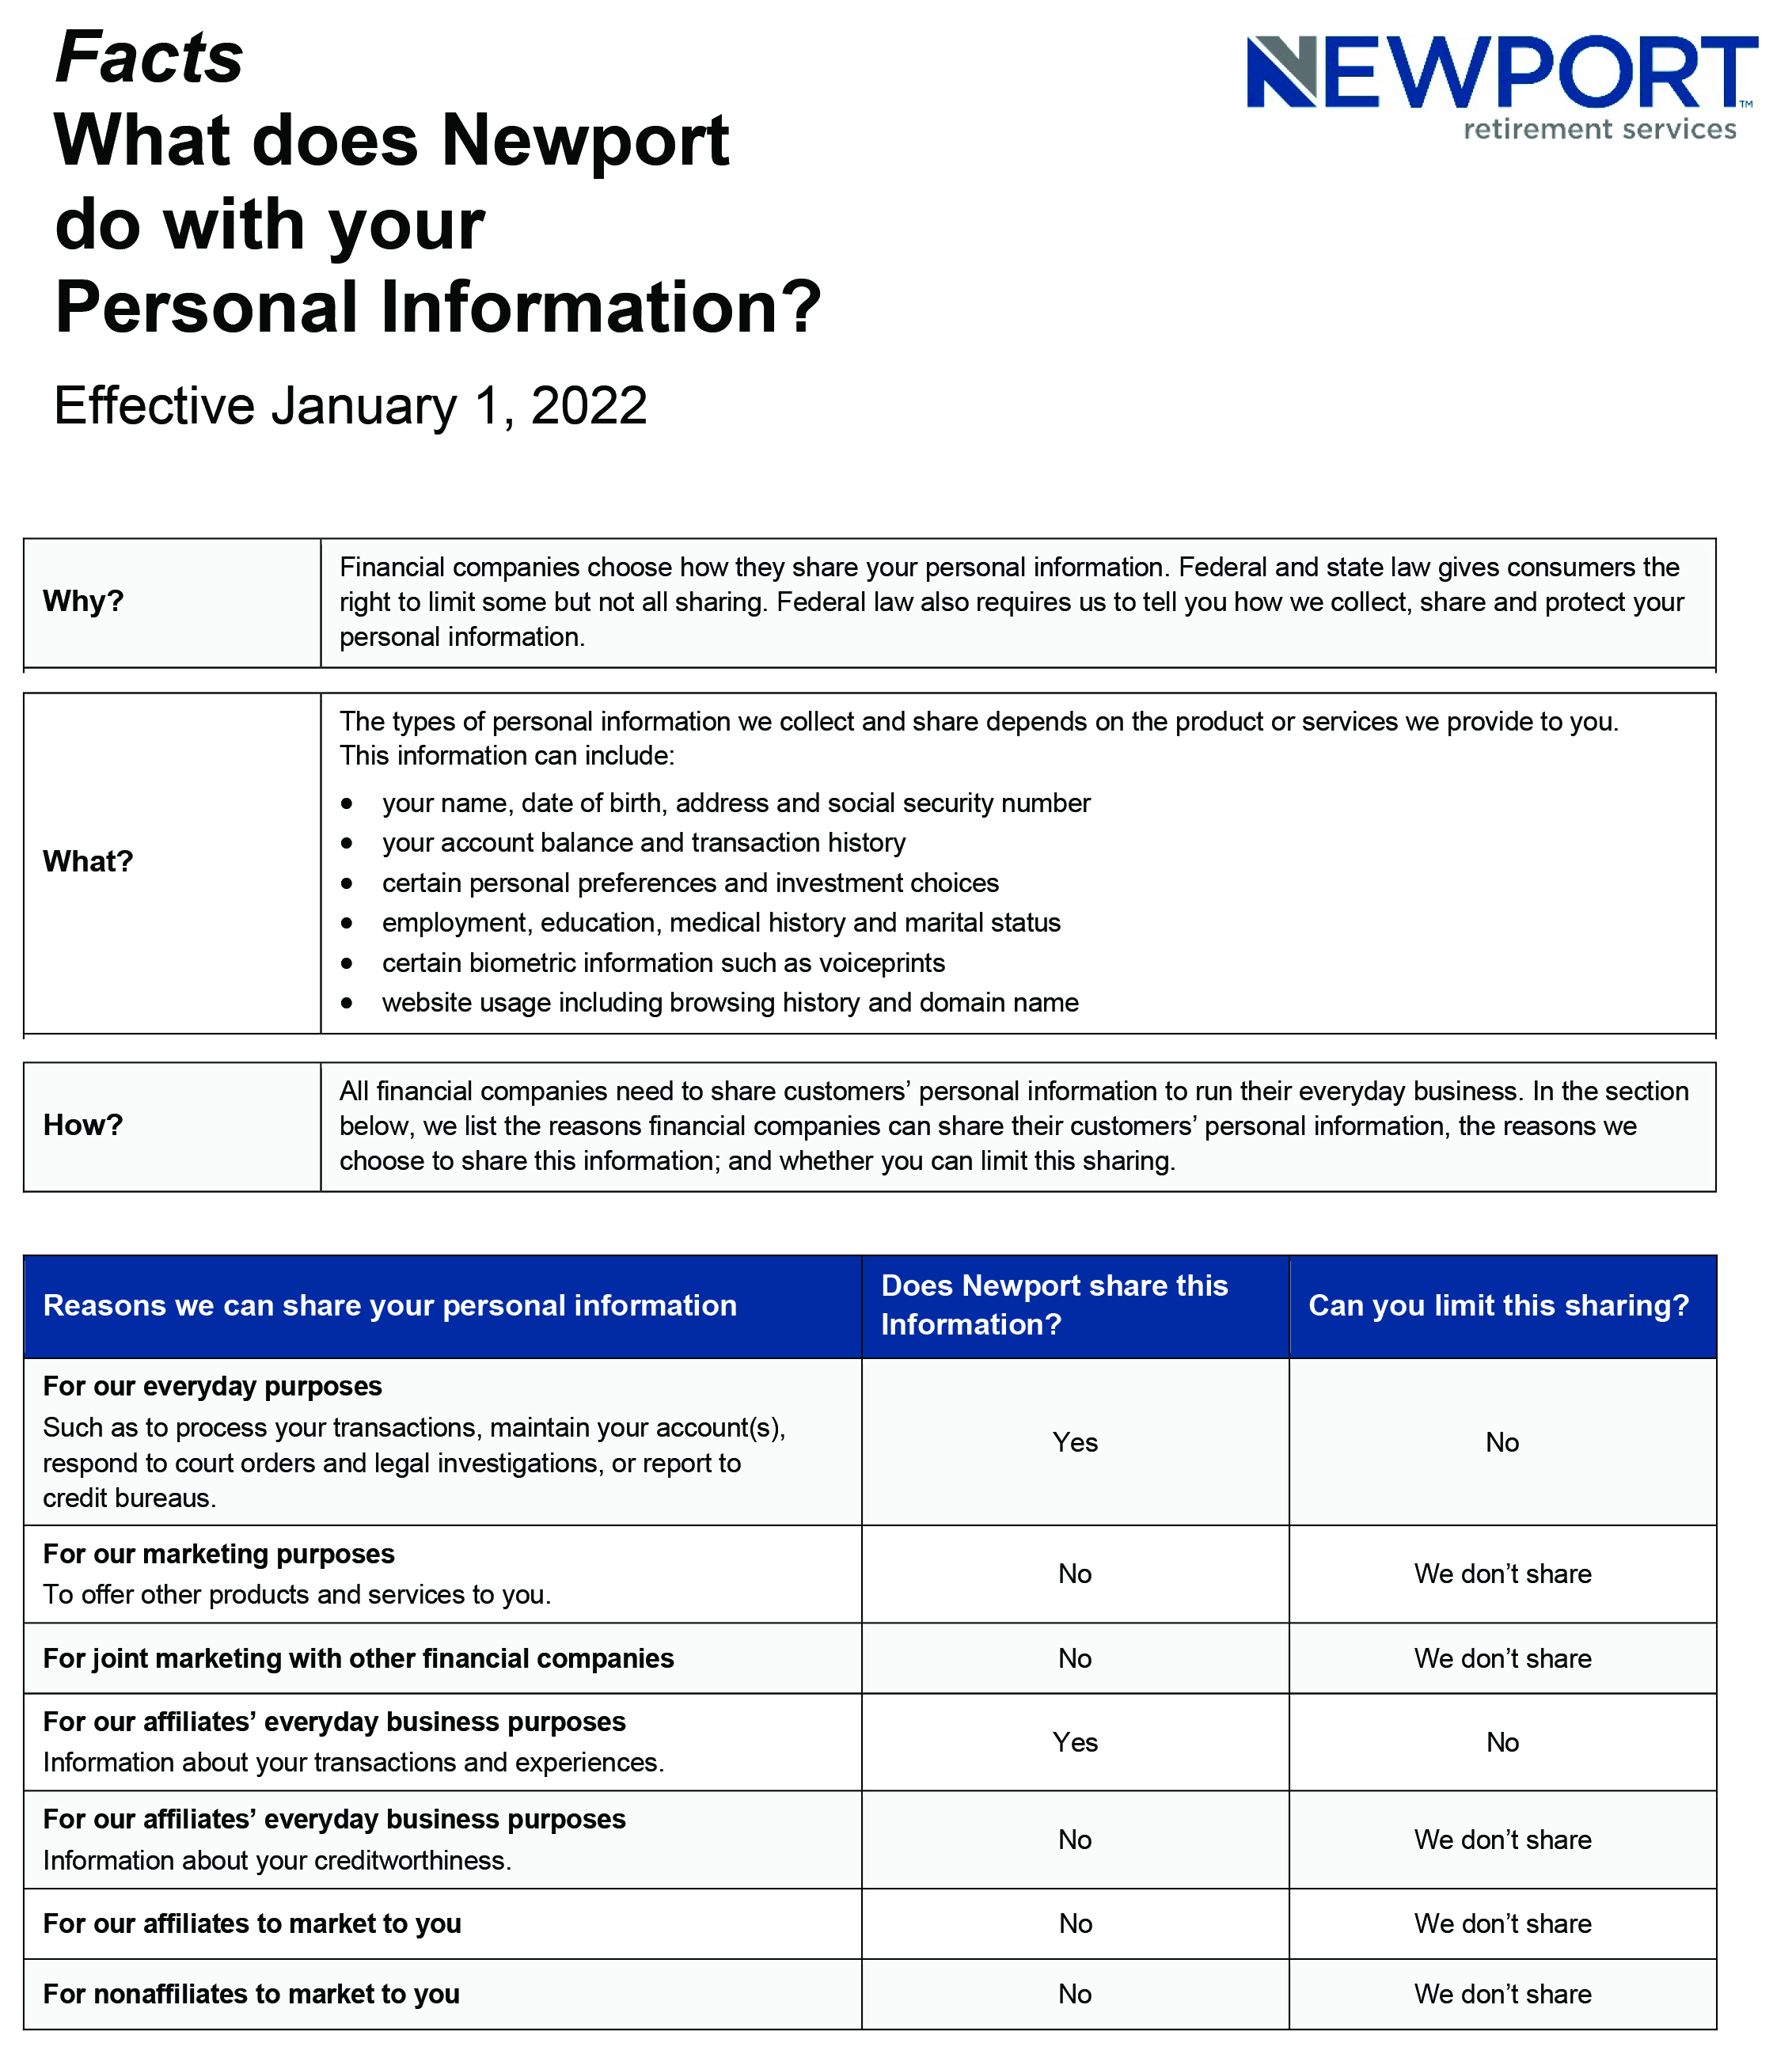 Newport privacy policy image one - Information We Collect